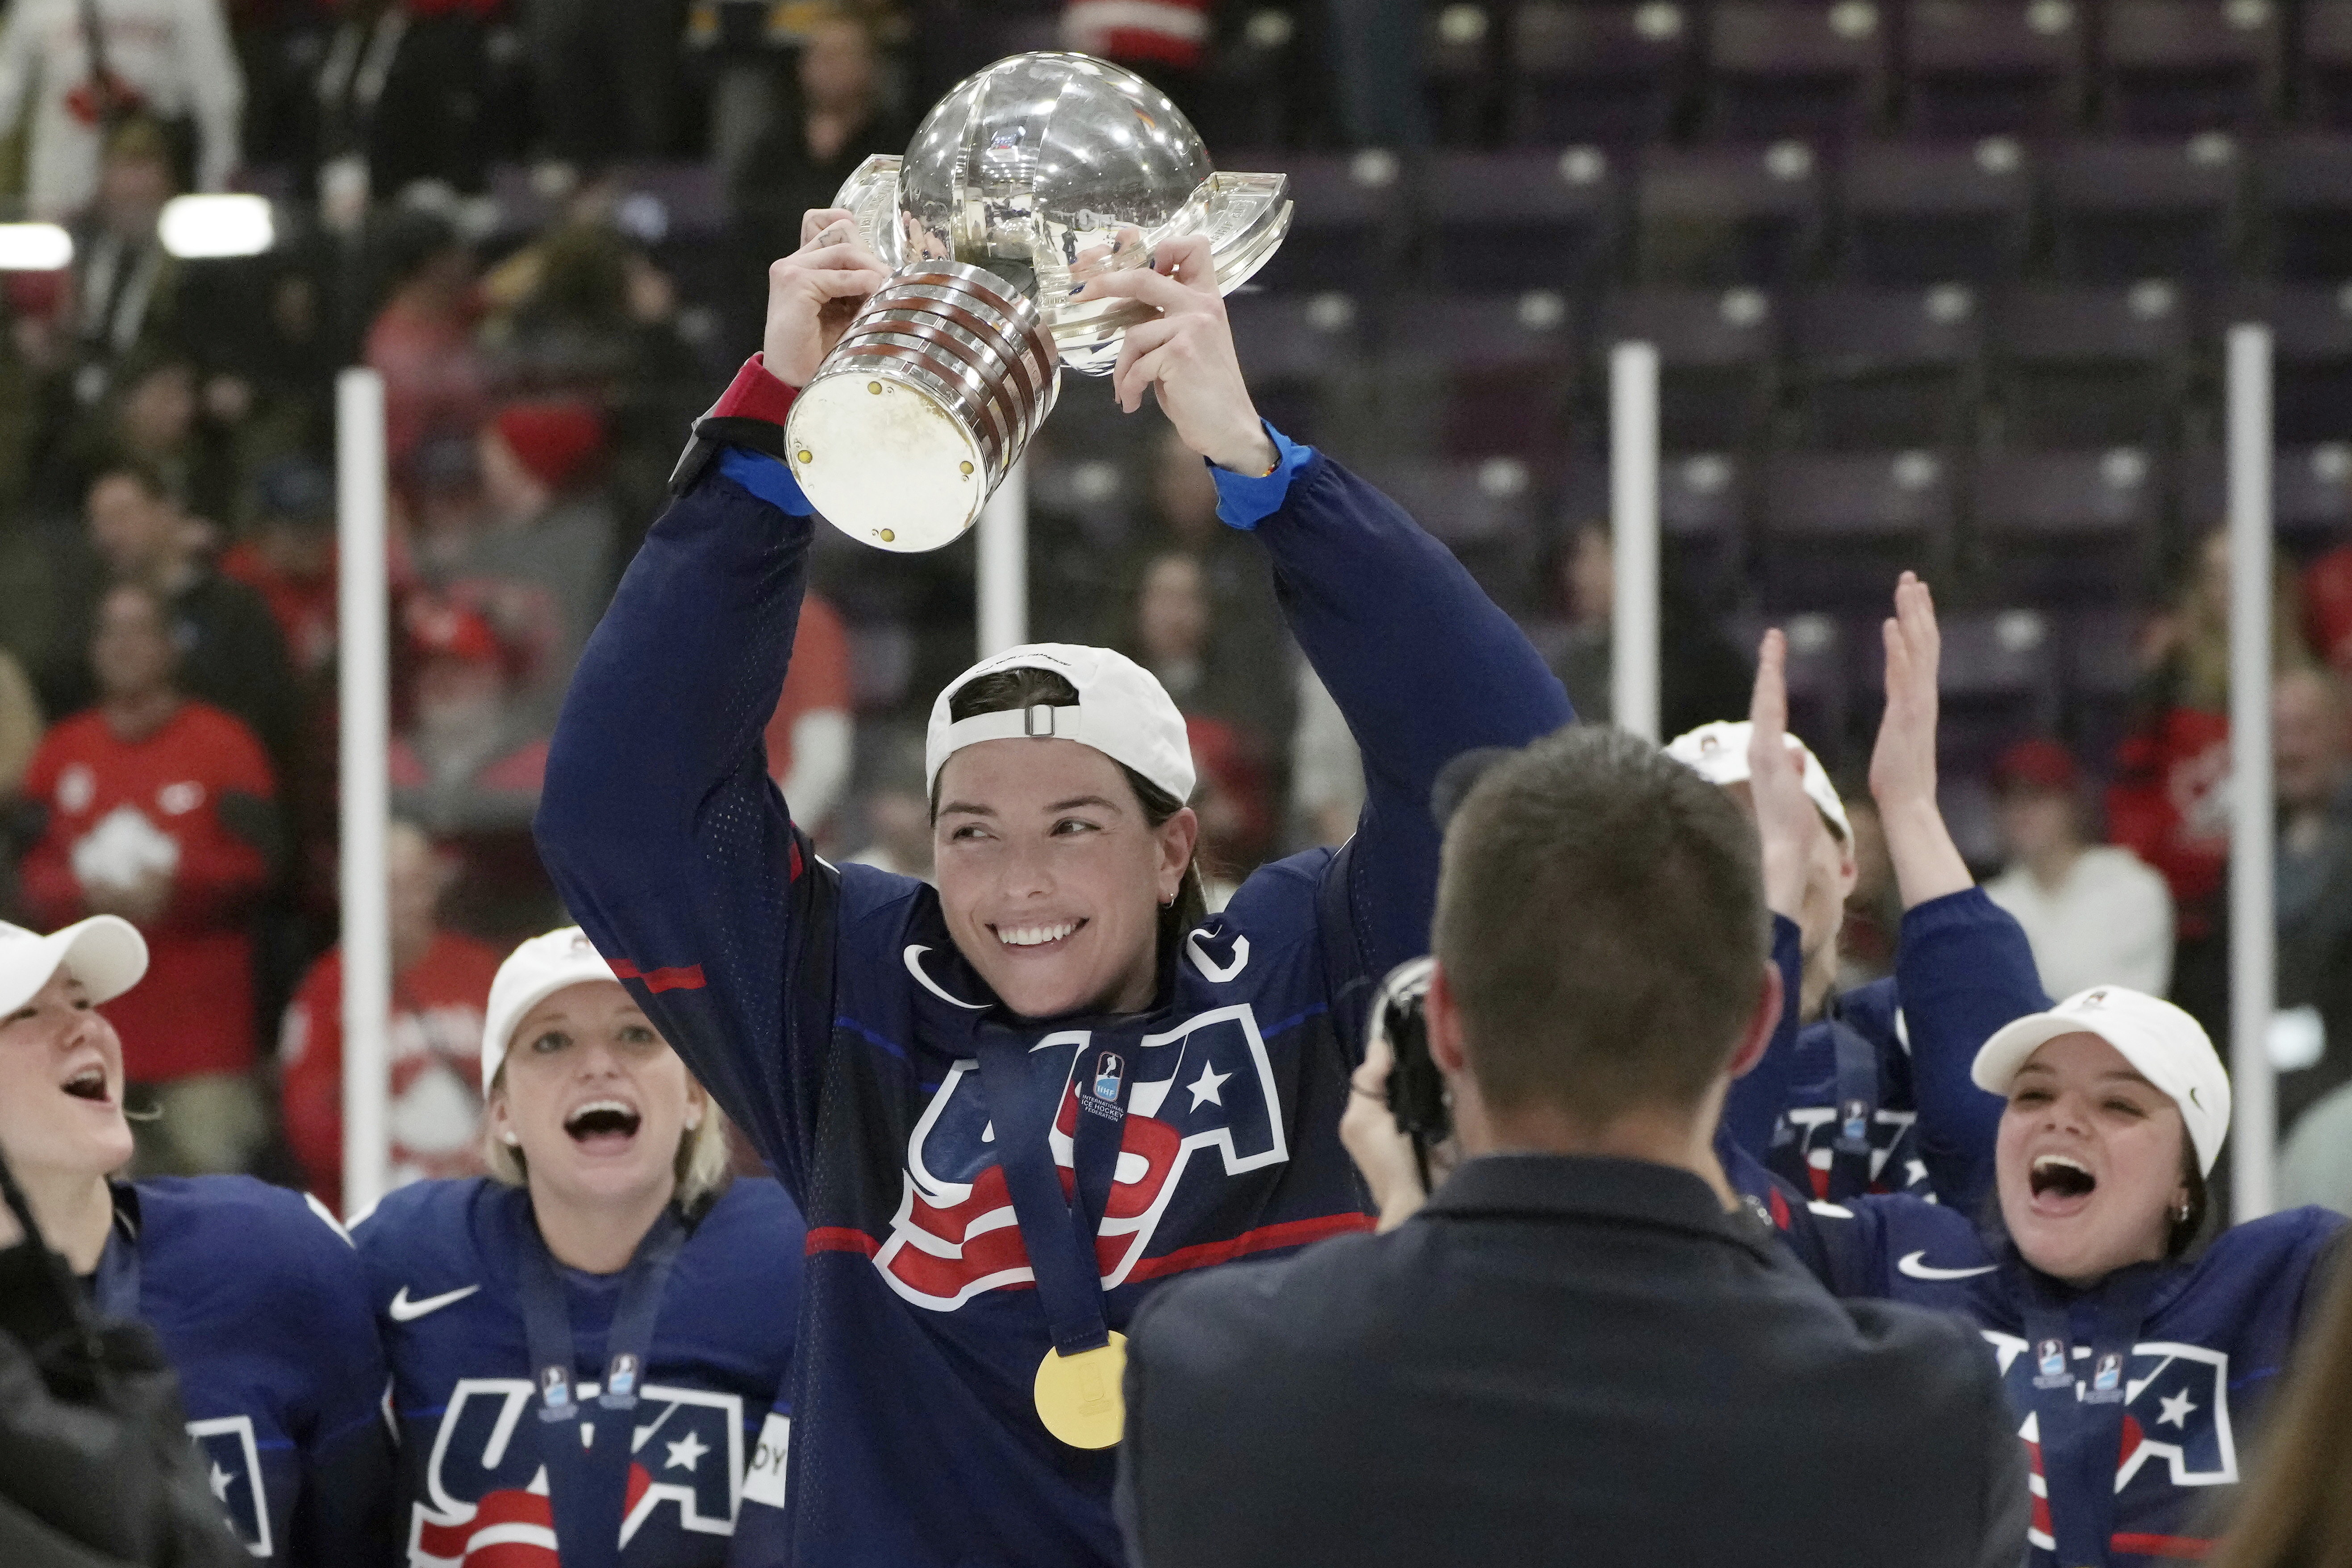 Top Women's Hockey Players Announce Series of Tournaments, Chicago News